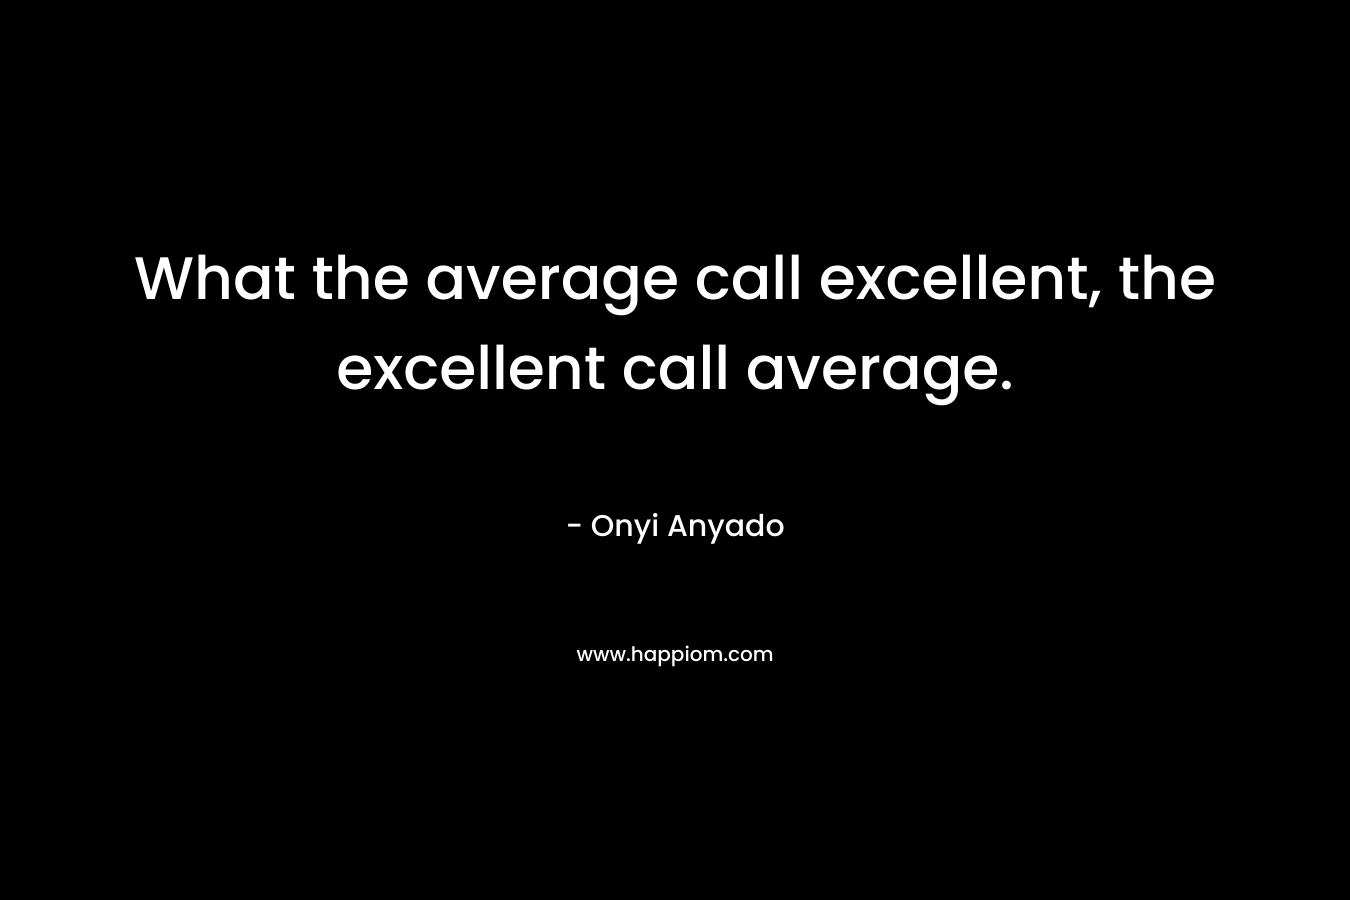 What the average call excellent, the excellent call average. – Onyi Anyado